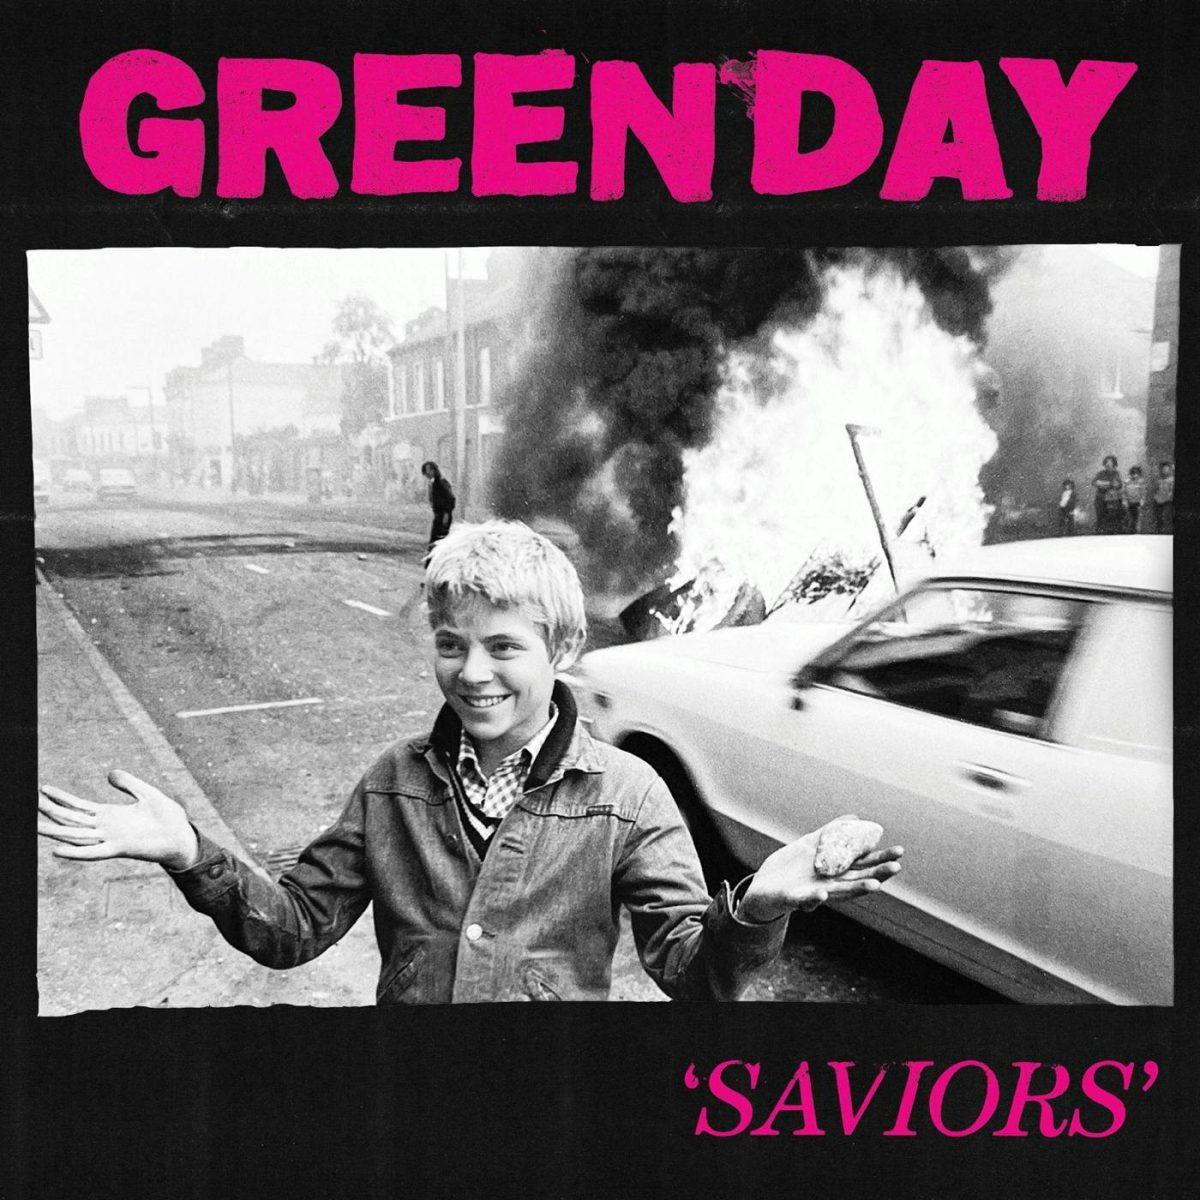 Saviors%3A+The+truth+behind+Green+Day%E2%80%99s+newest+album